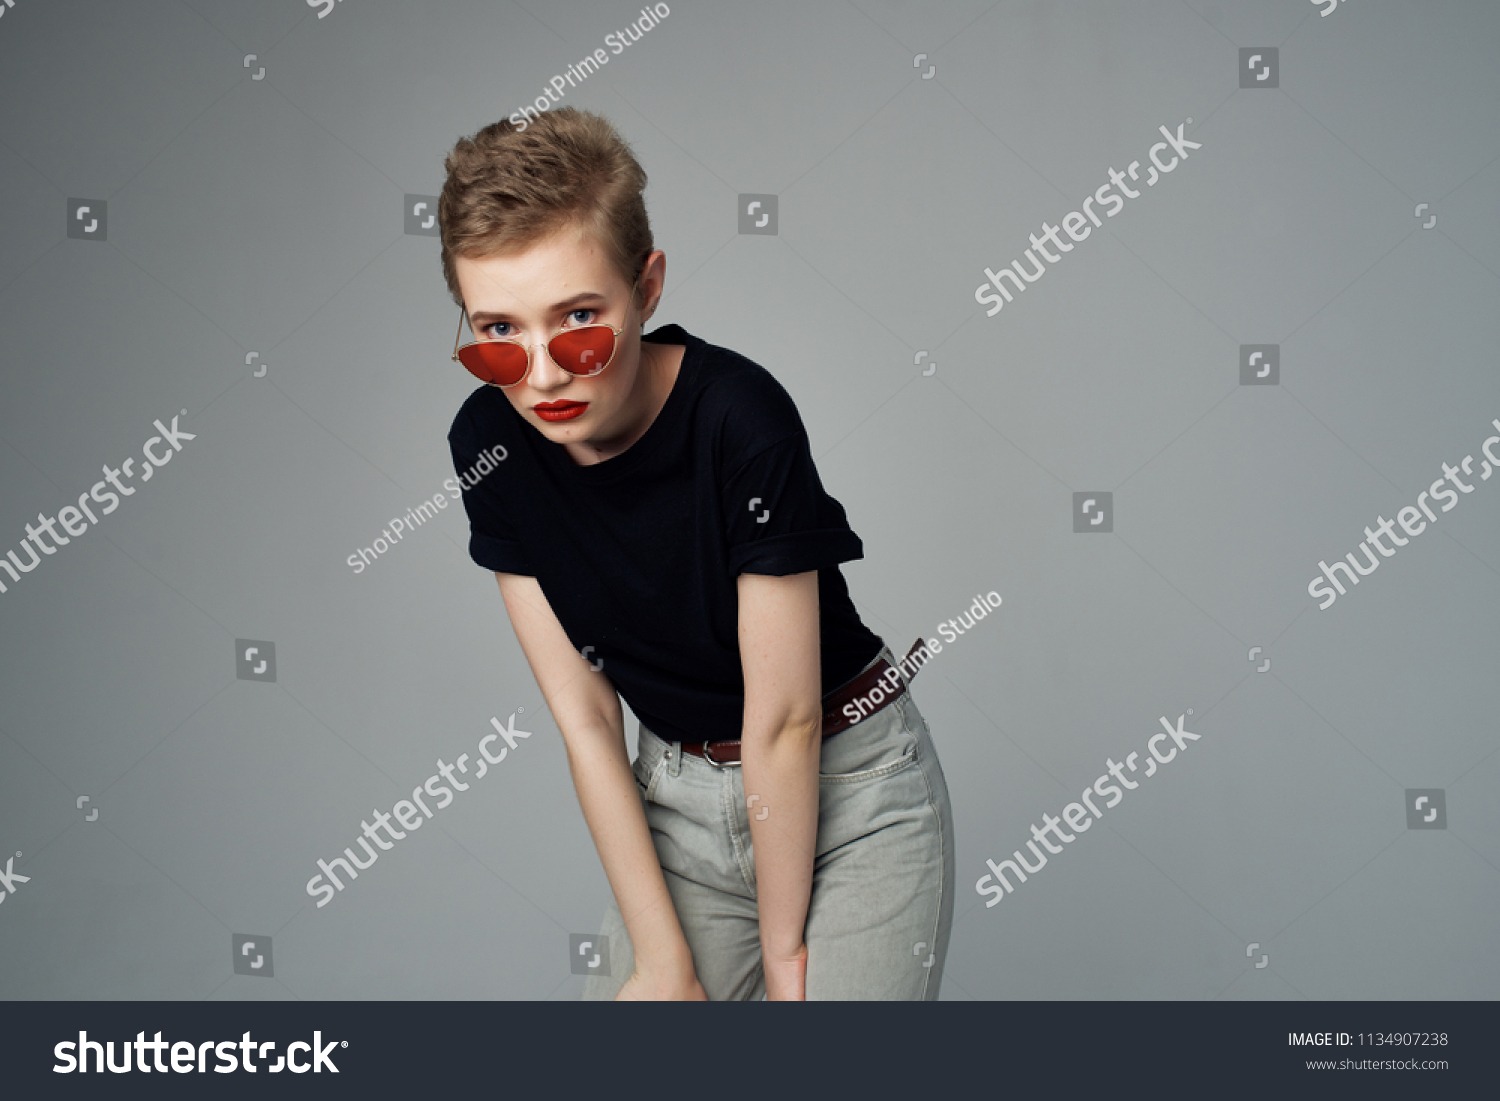  woman in a black T-shirt wearing glasses on a gray background                               #1134907238